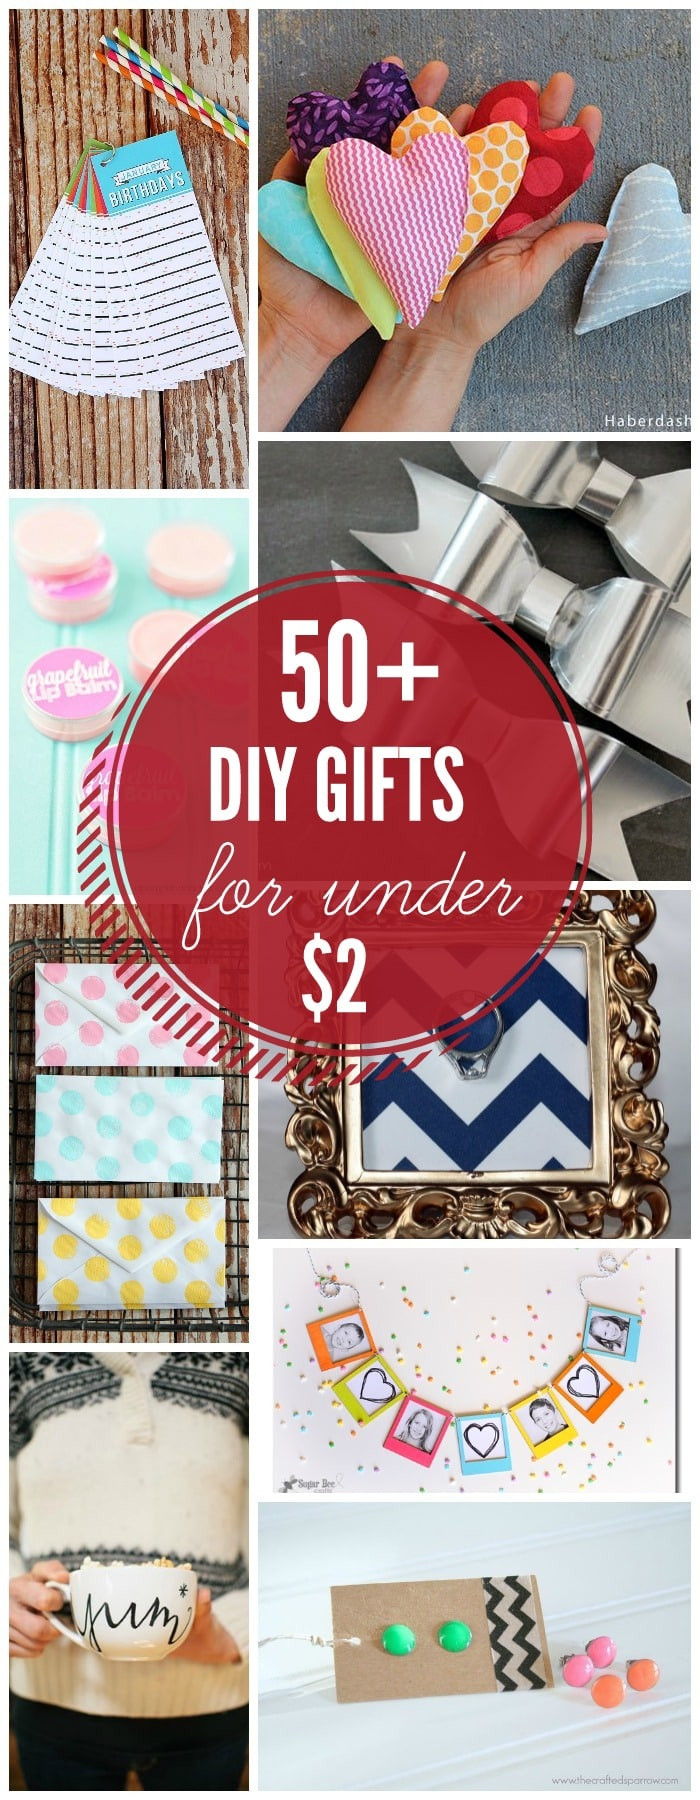 Christmas Gift Ideas For Couples Under 50
 DIY Gifts Under $2